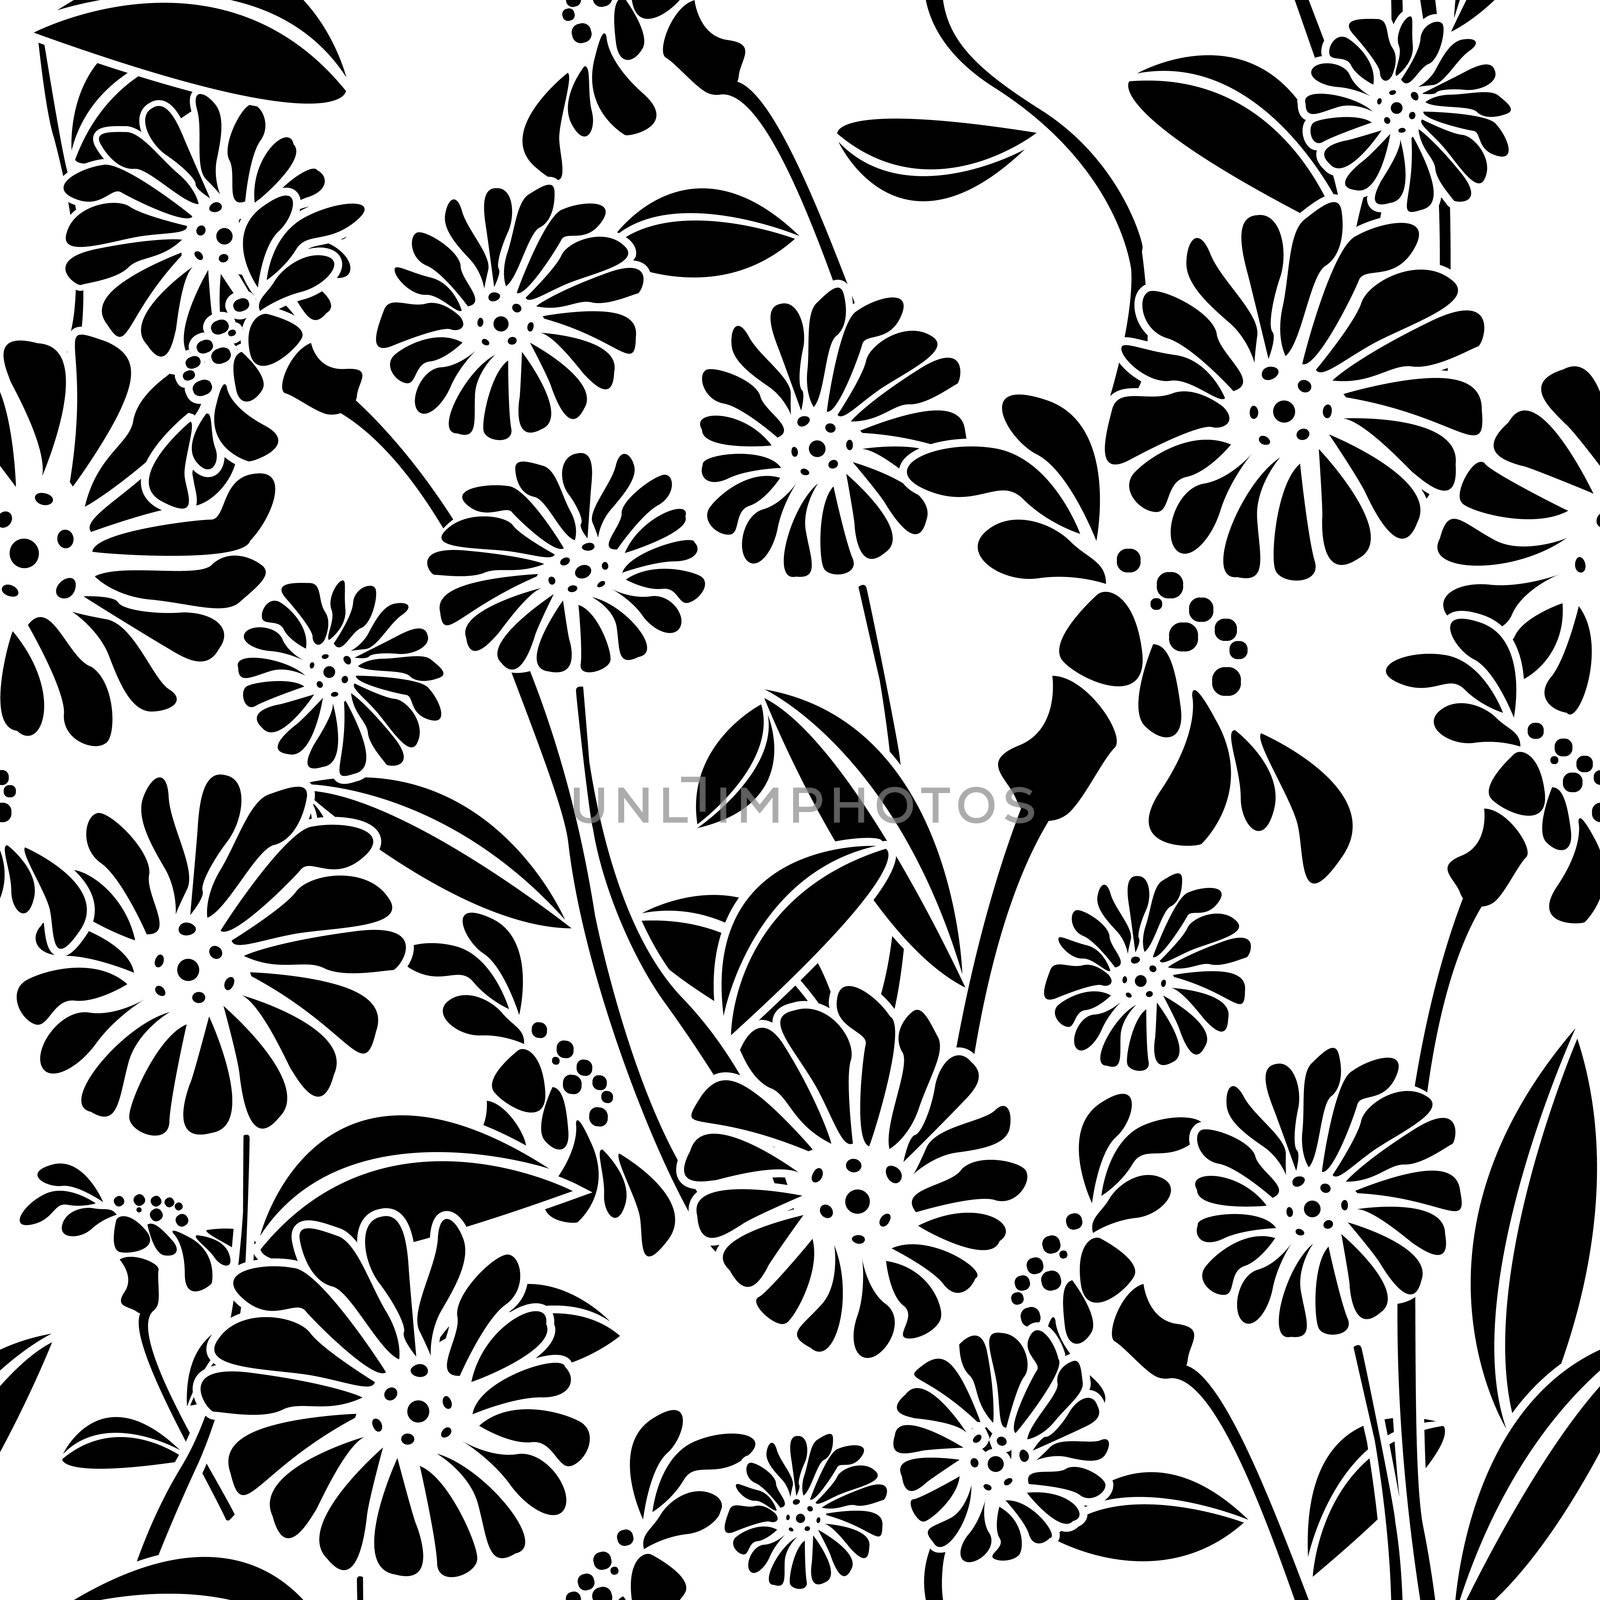 Seamless floral background, graphic pattern by Lirch